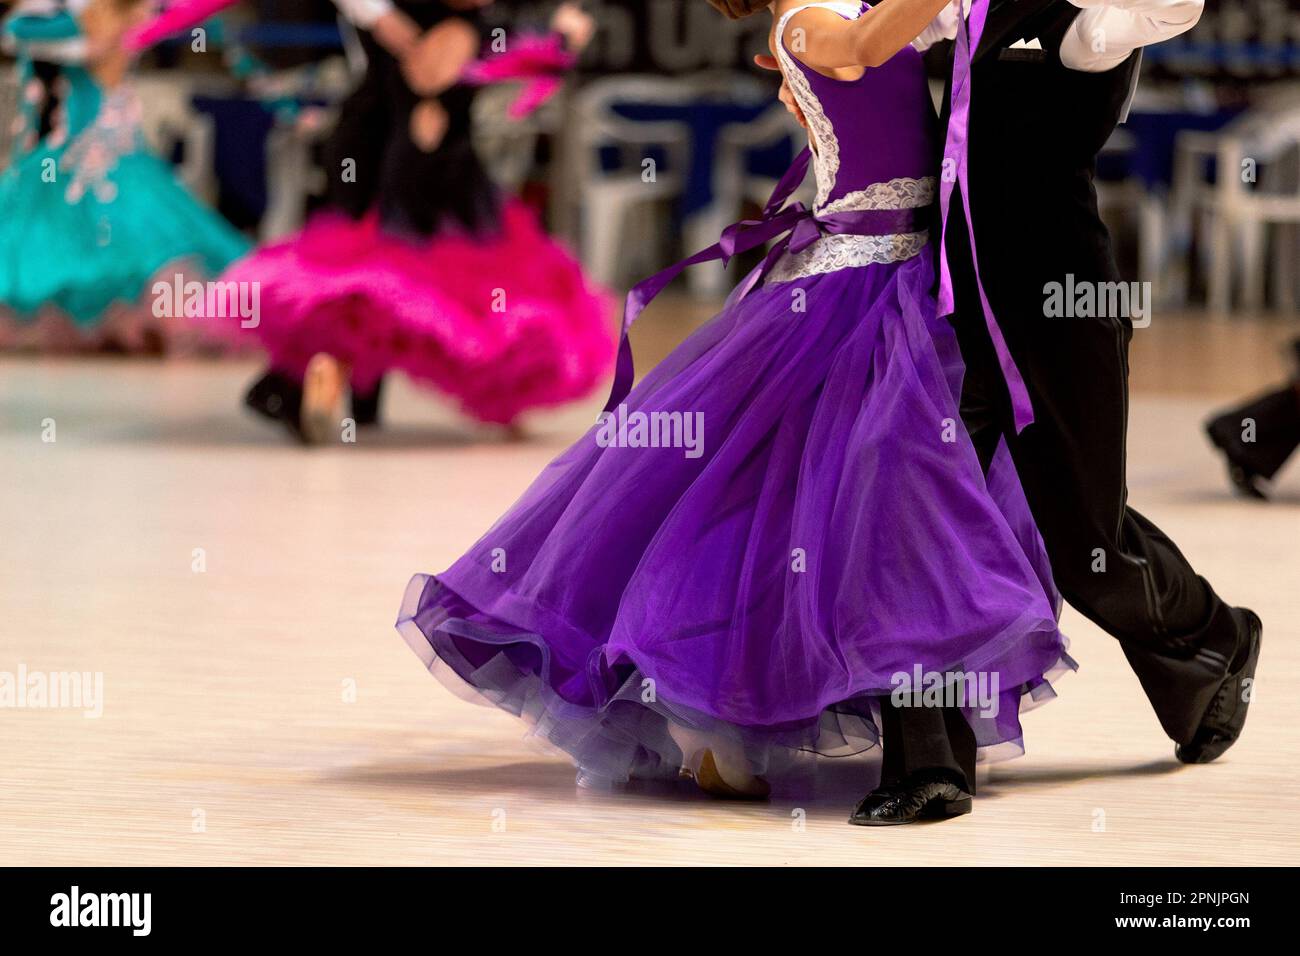 young couples dancers dancing waltz in dancesport competition, colorful dresses for girls and black tail suit for boys Stock Photo